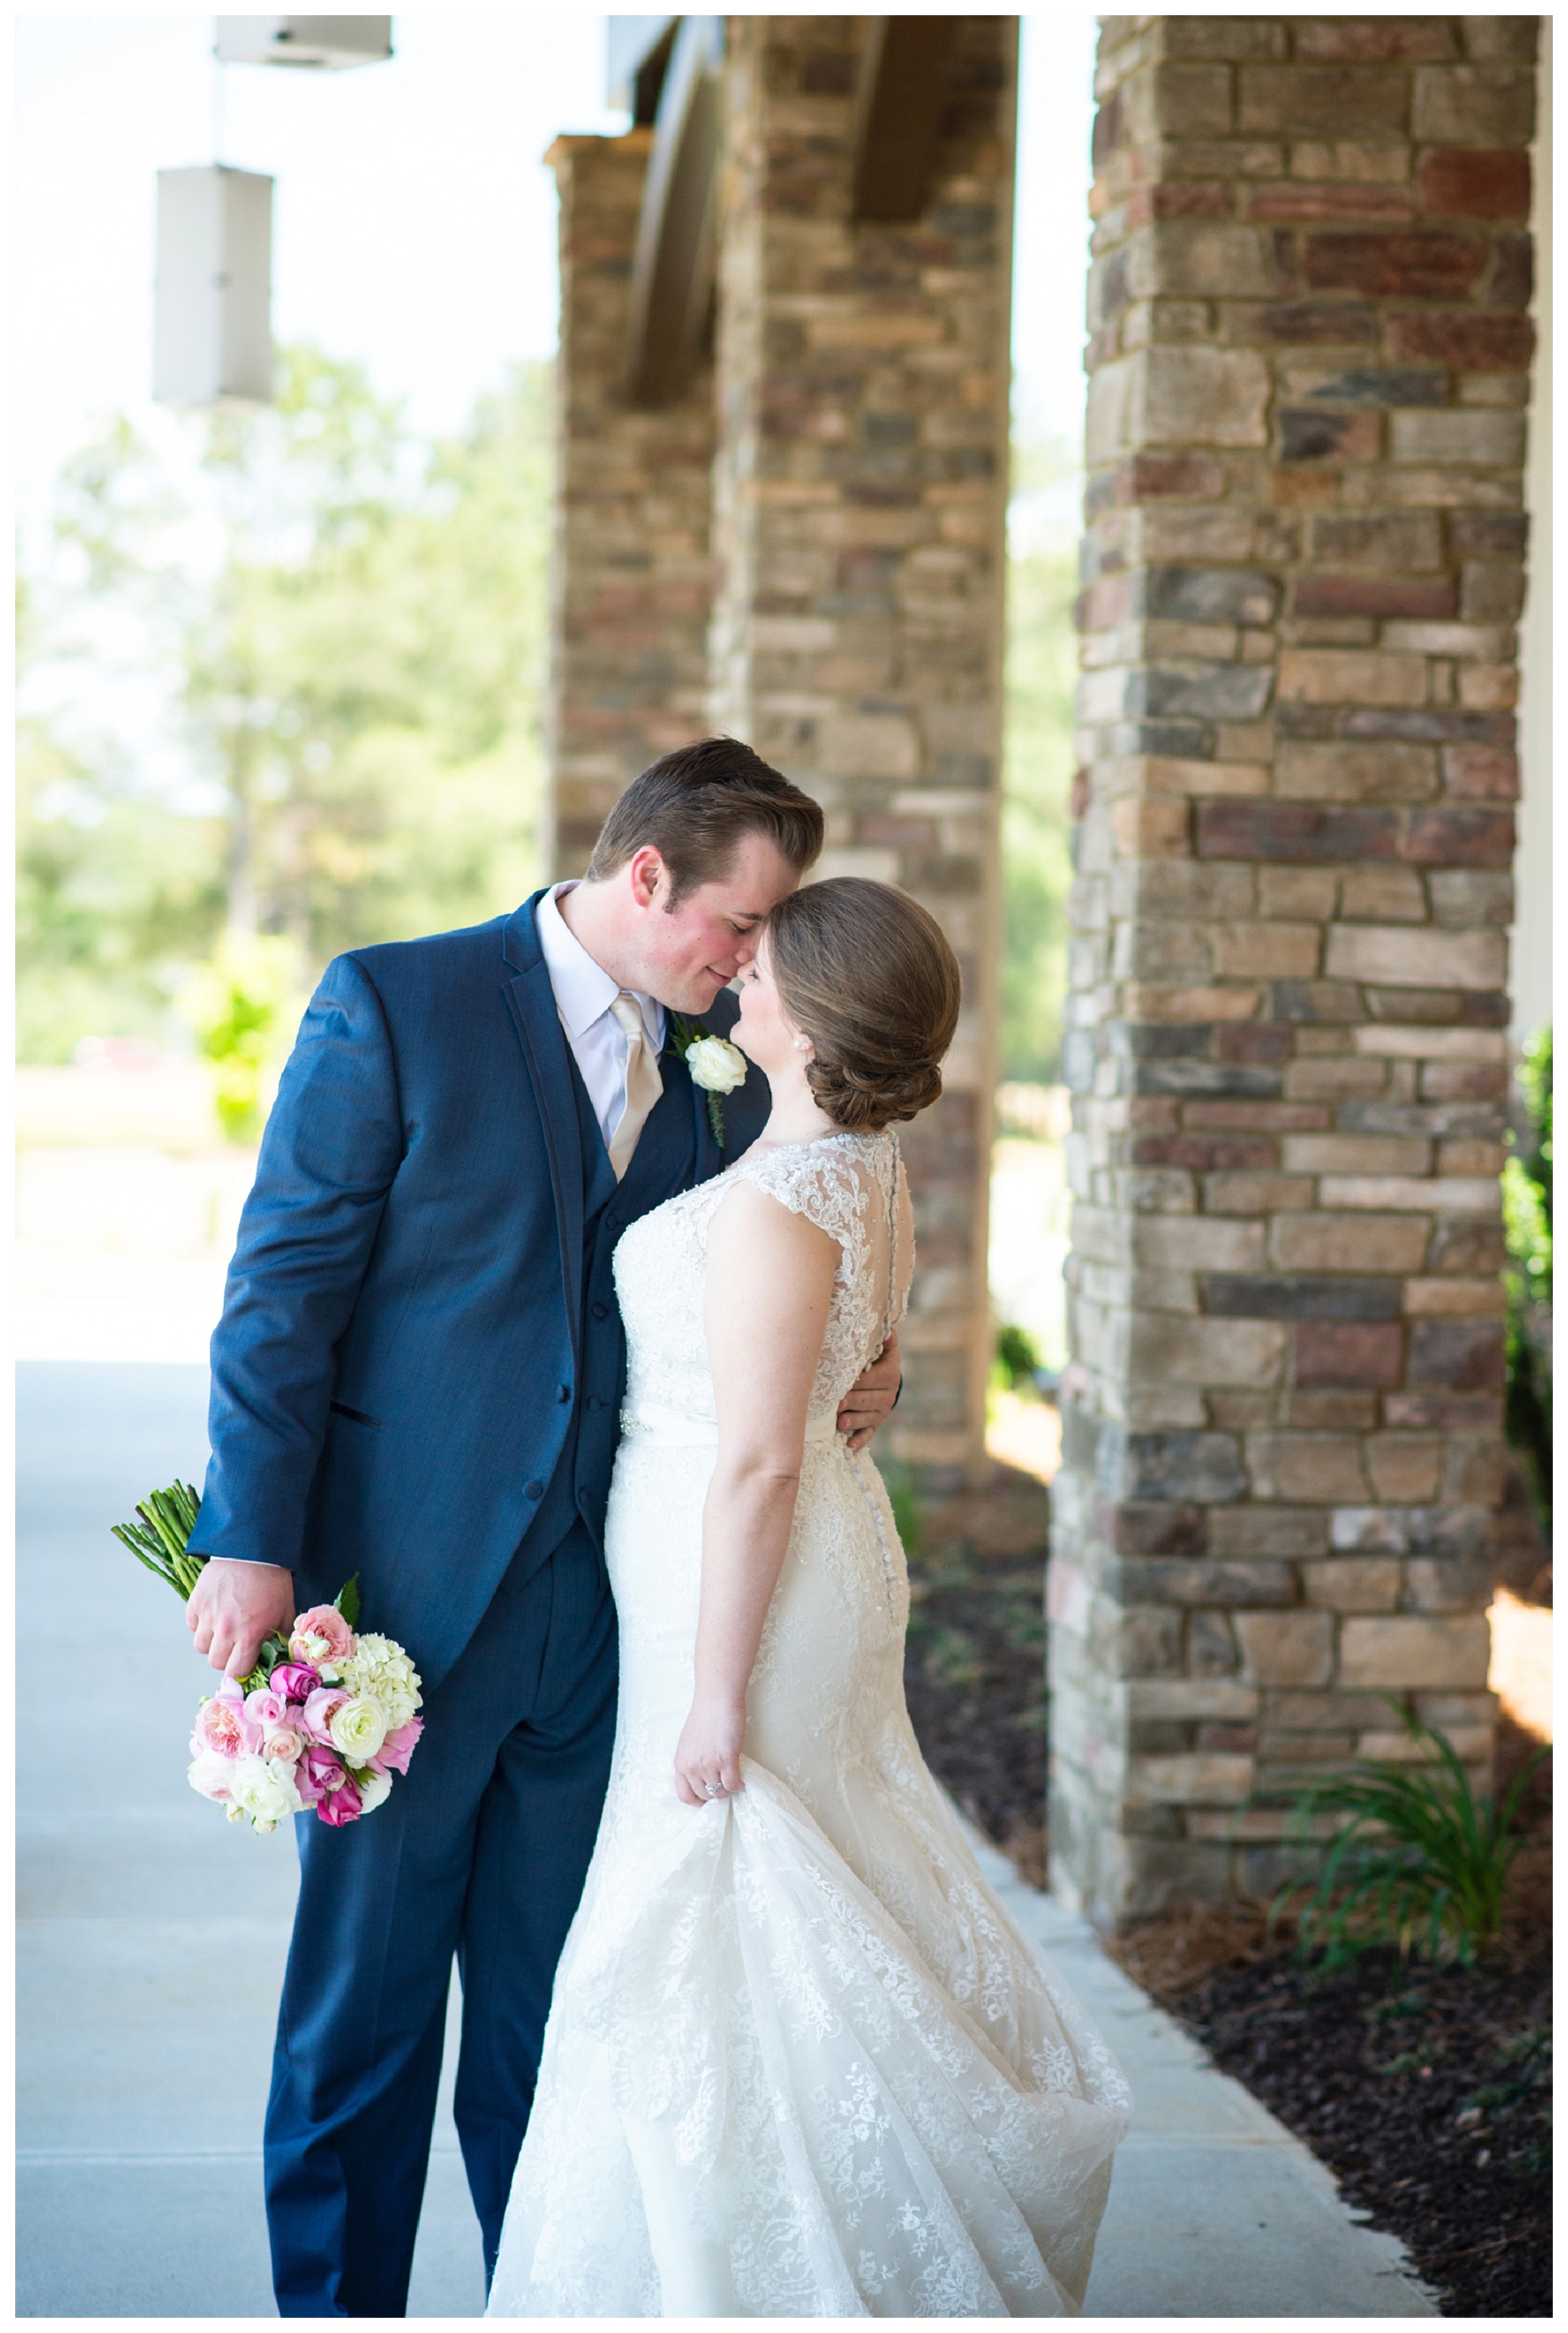 West Georgia wedding photography | Photography by Laura Barnes Photo